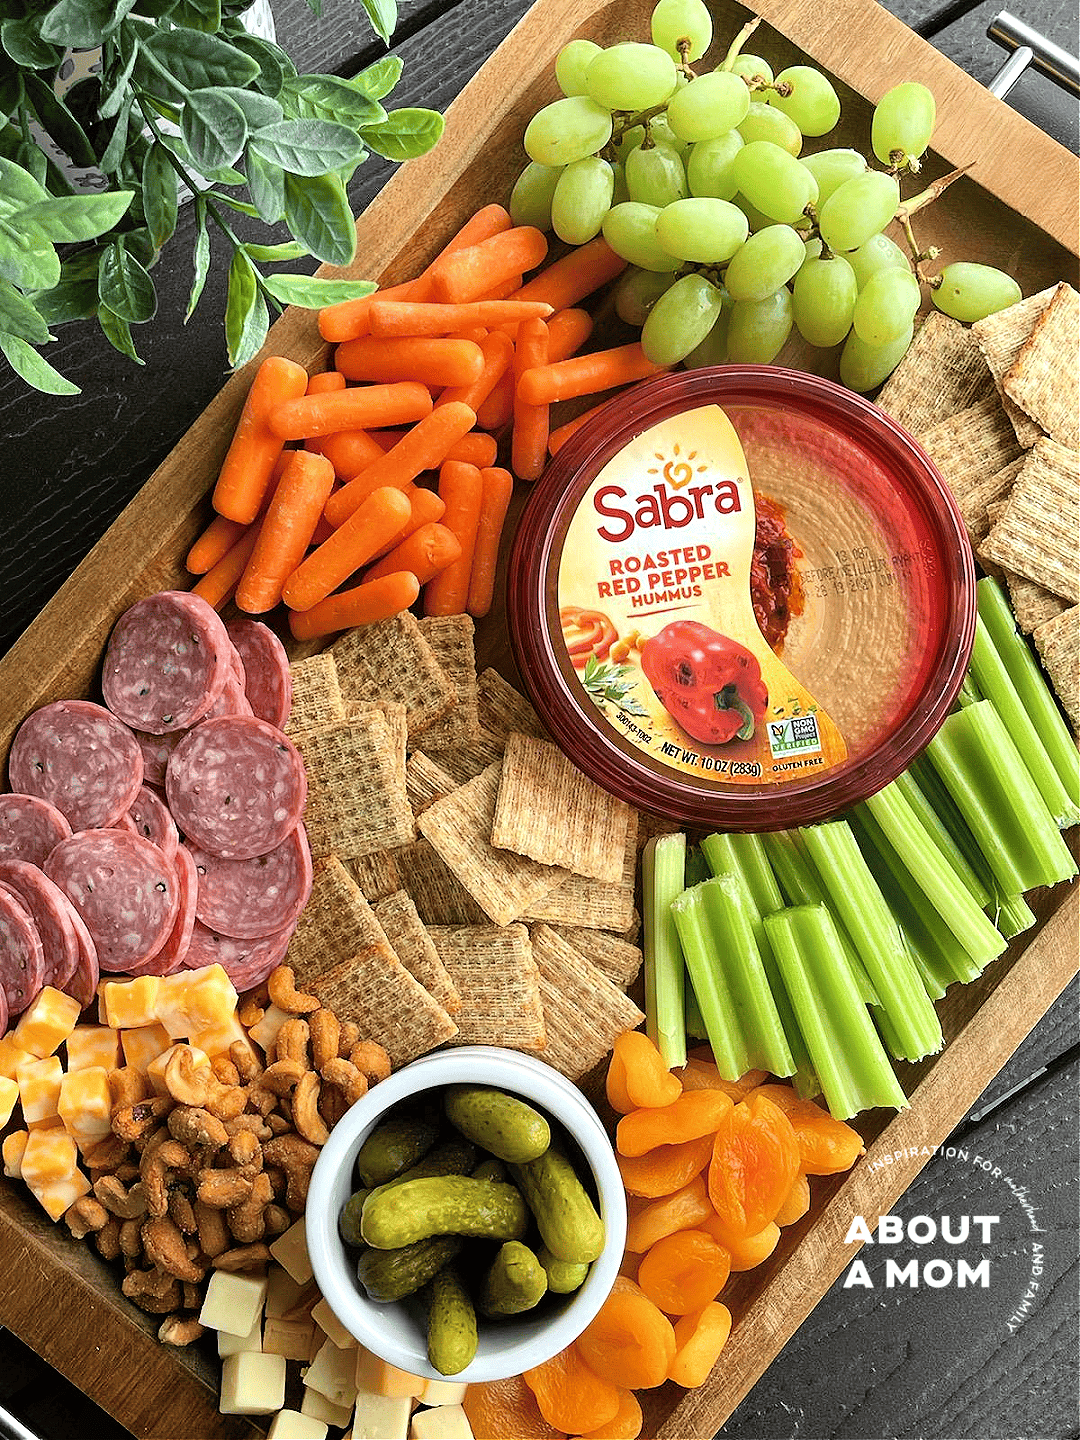 Have you ever wondered how to make a charcuterie board really pop? A charcuterie board is the perfect appetizer and the essence of easy entertaining. Make a snack board everyone will love in 3 easy steps.